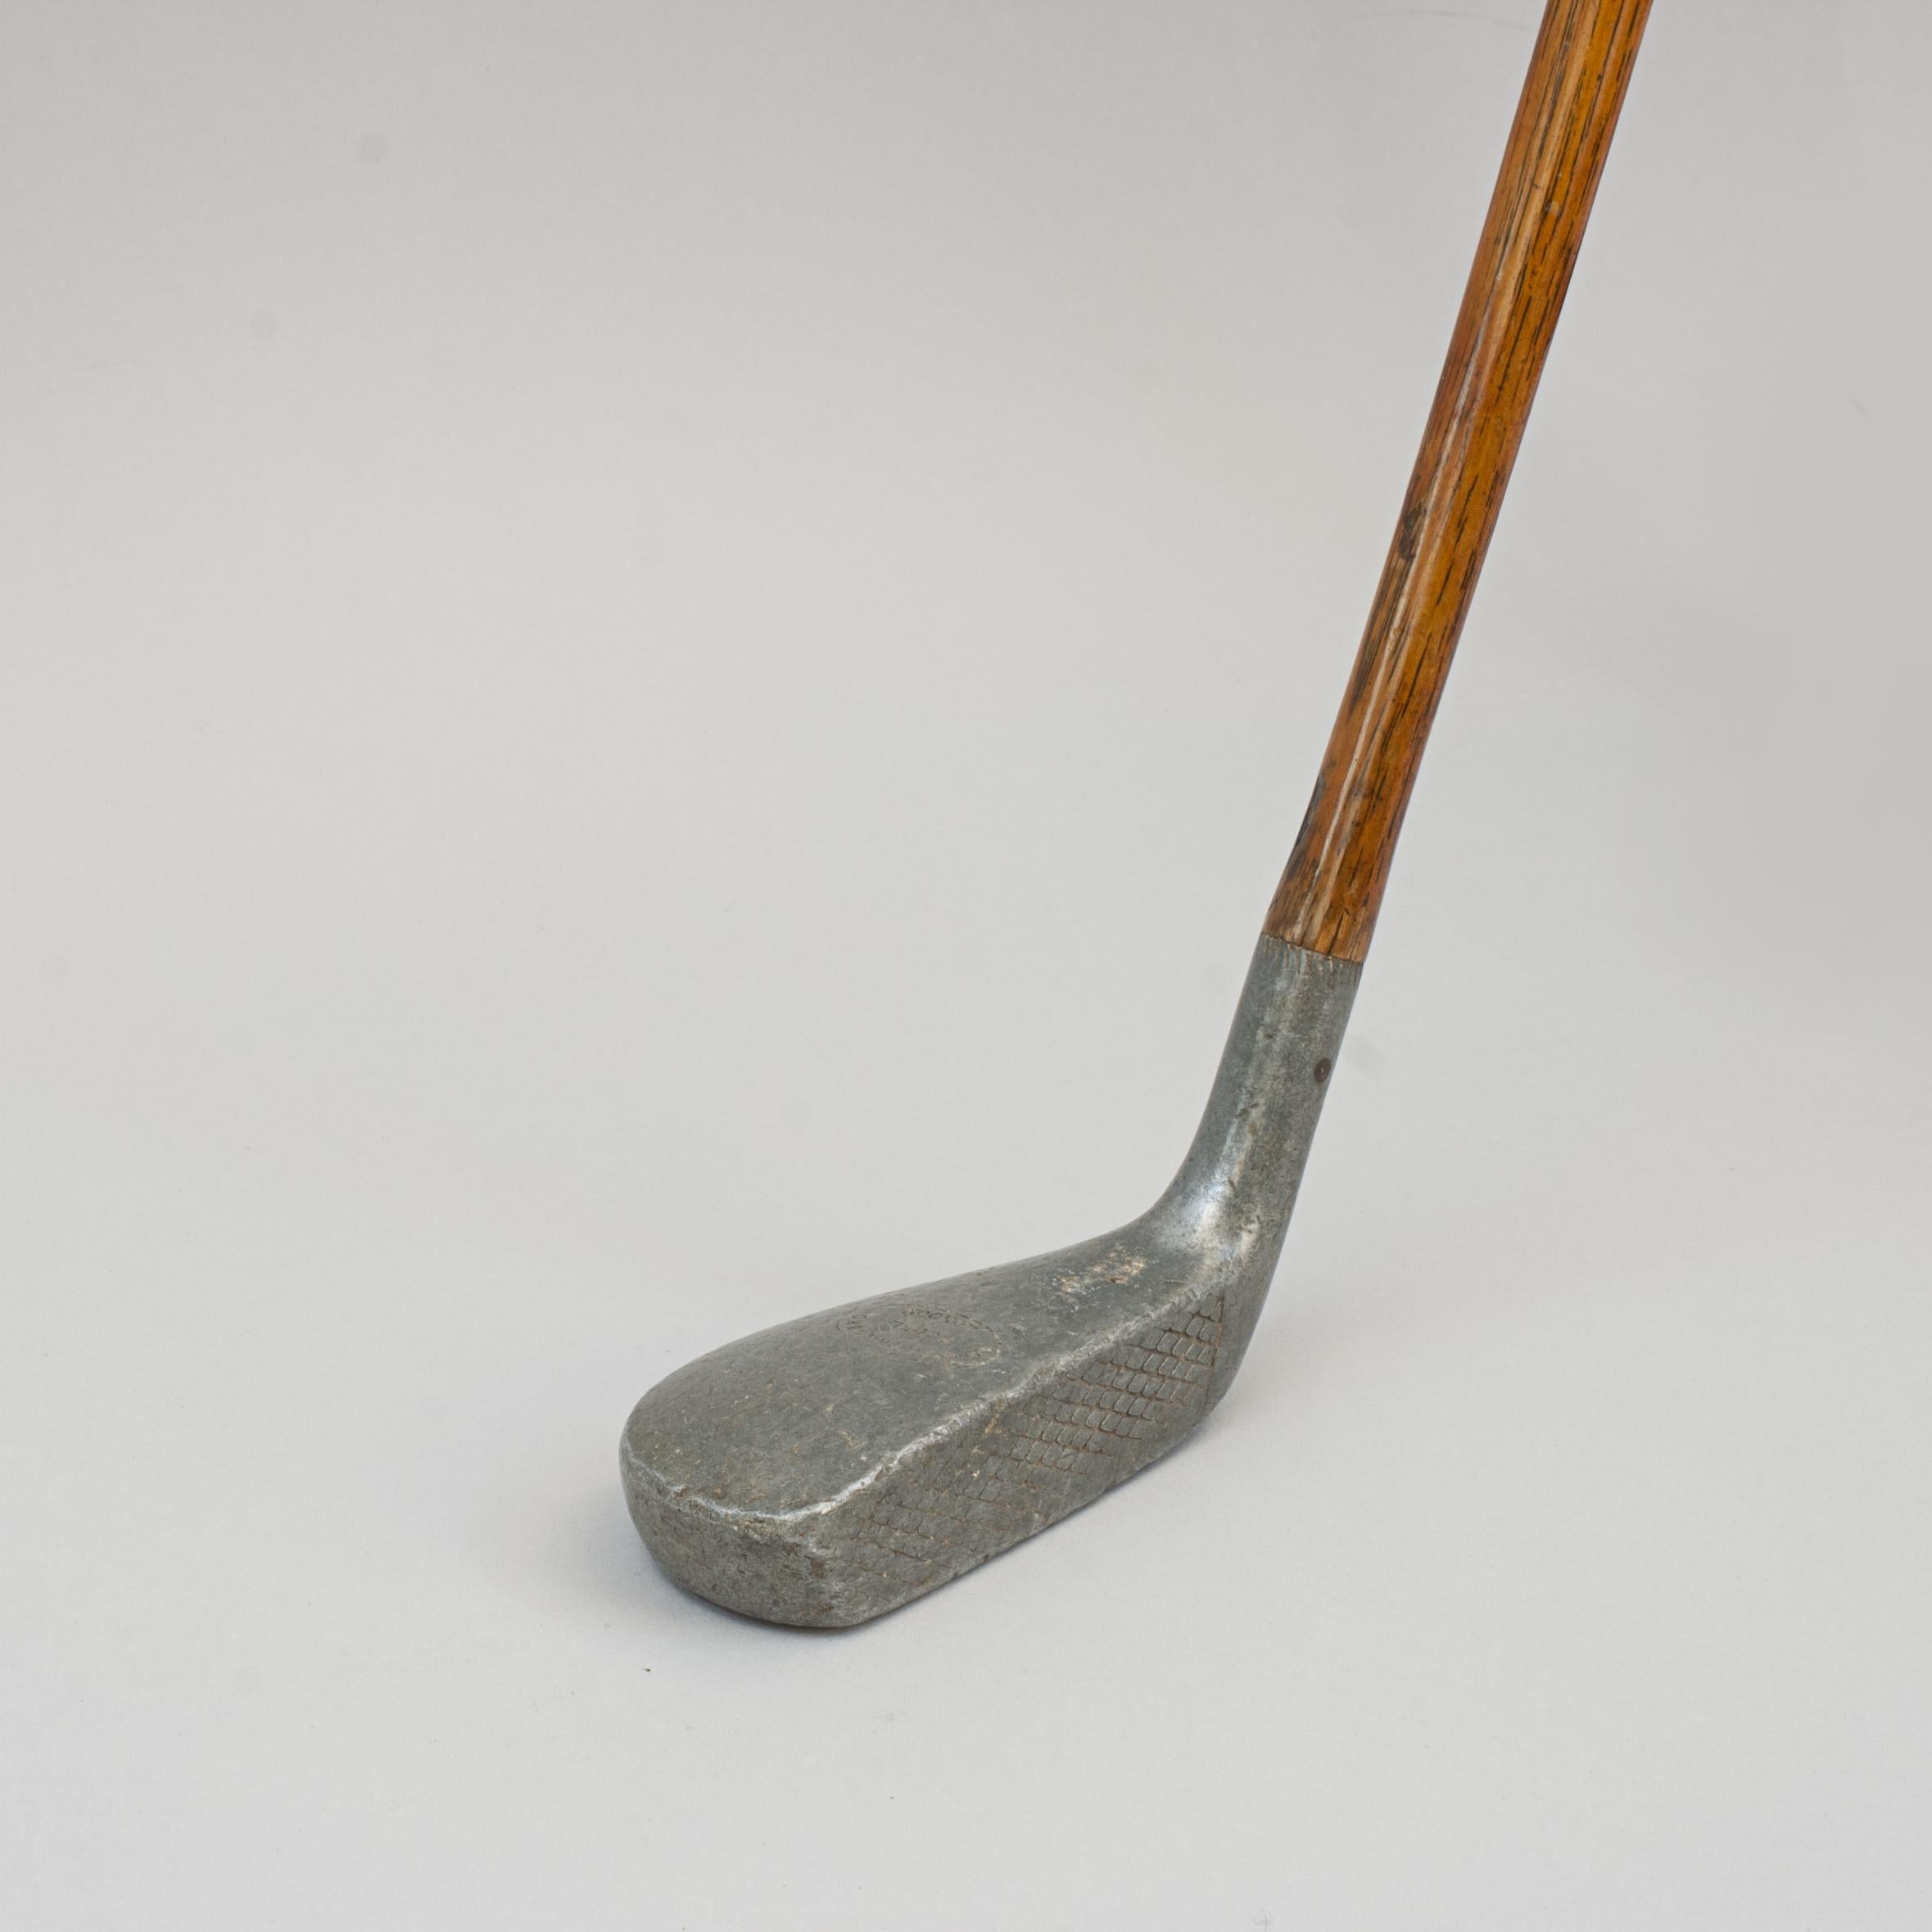 Antique Spalding Aluminium Mallet Head Putter.
A good example of an aluminium head putter with original hickory shaft by A.G Spalding & Bros. The crown of the club head stamped 'A.G Spalding & Bros., Model, London' whilst the club face is with